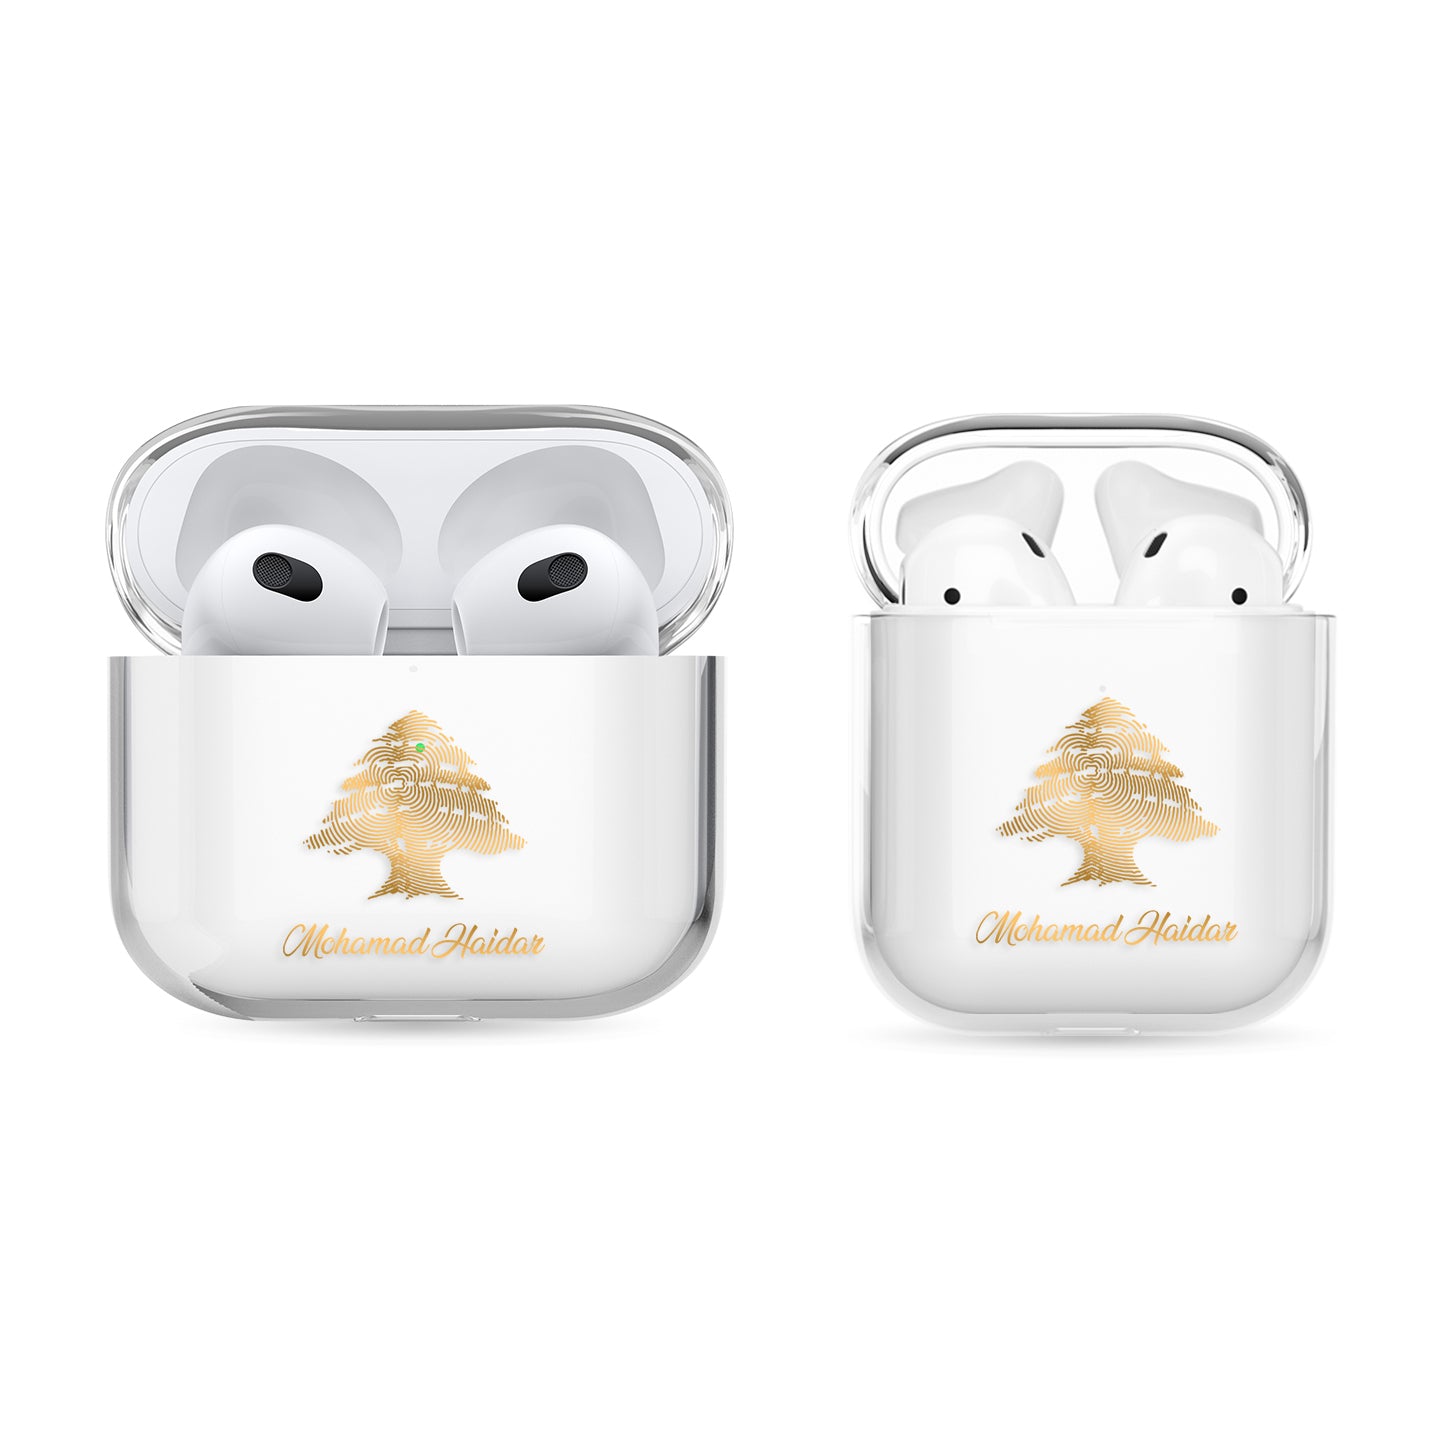 Airpods Hülle - Libanon